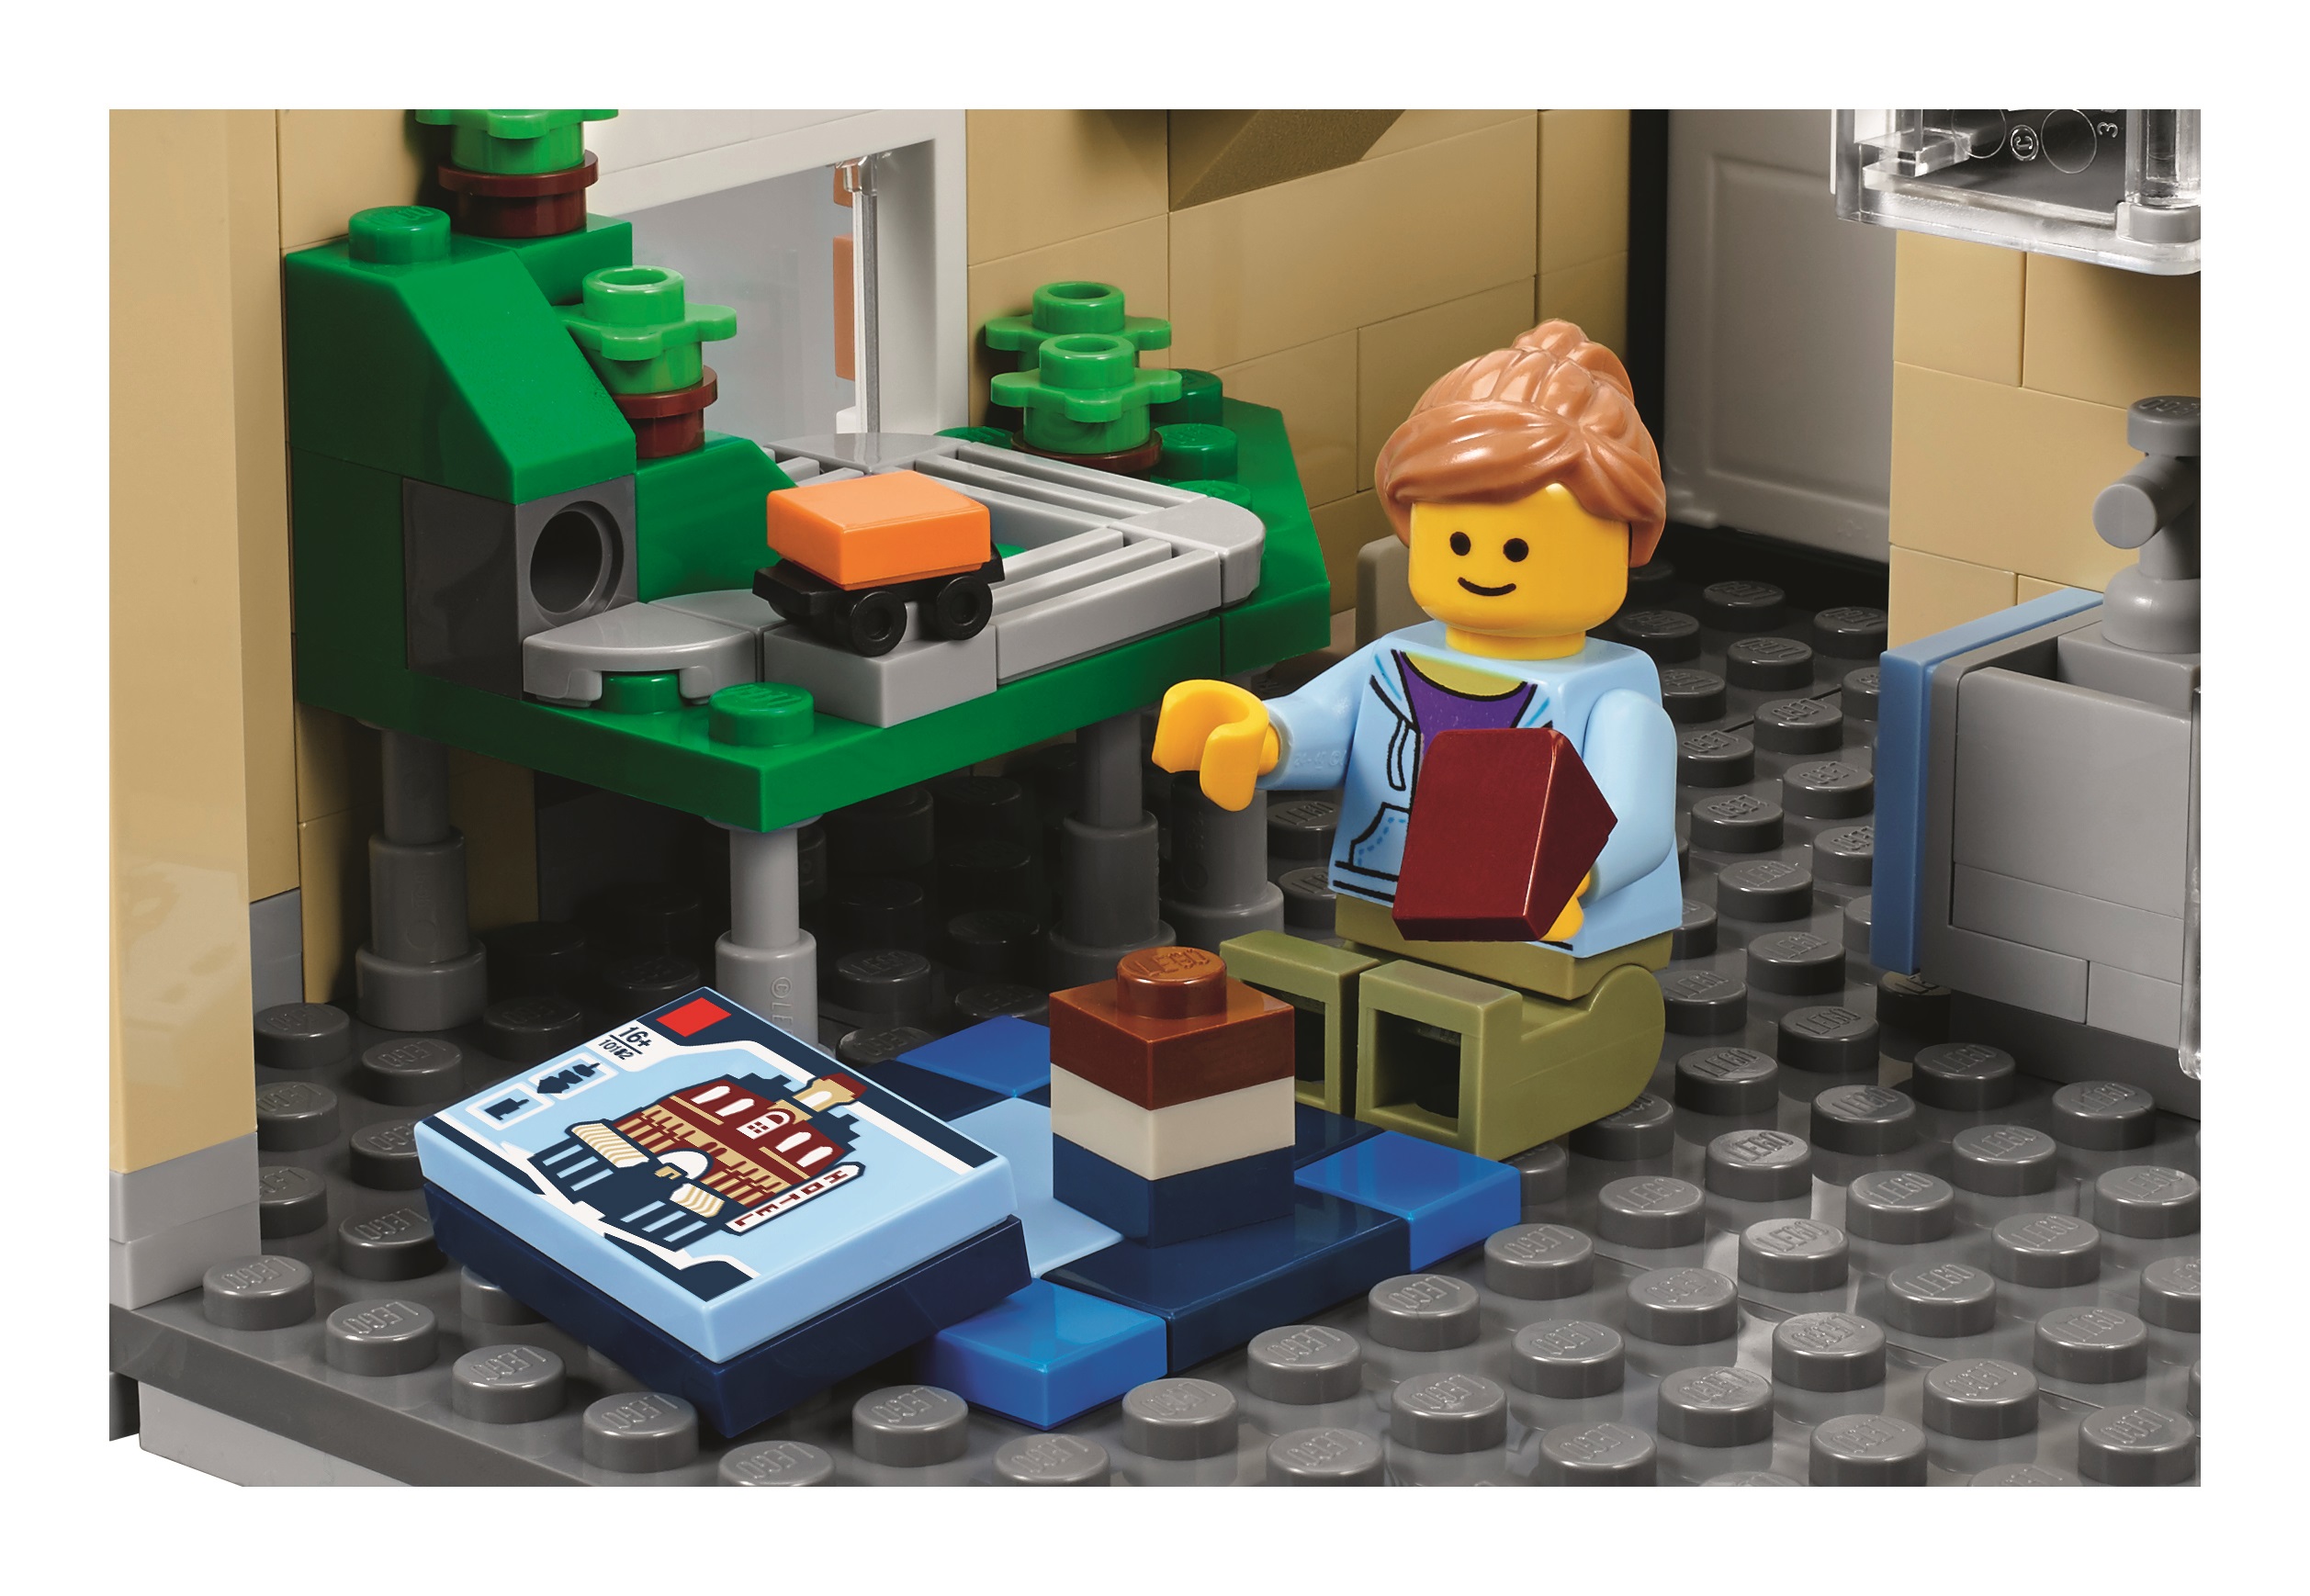 The 4 002 Piece Lego 10255 Assembly Square Is A 10 Year